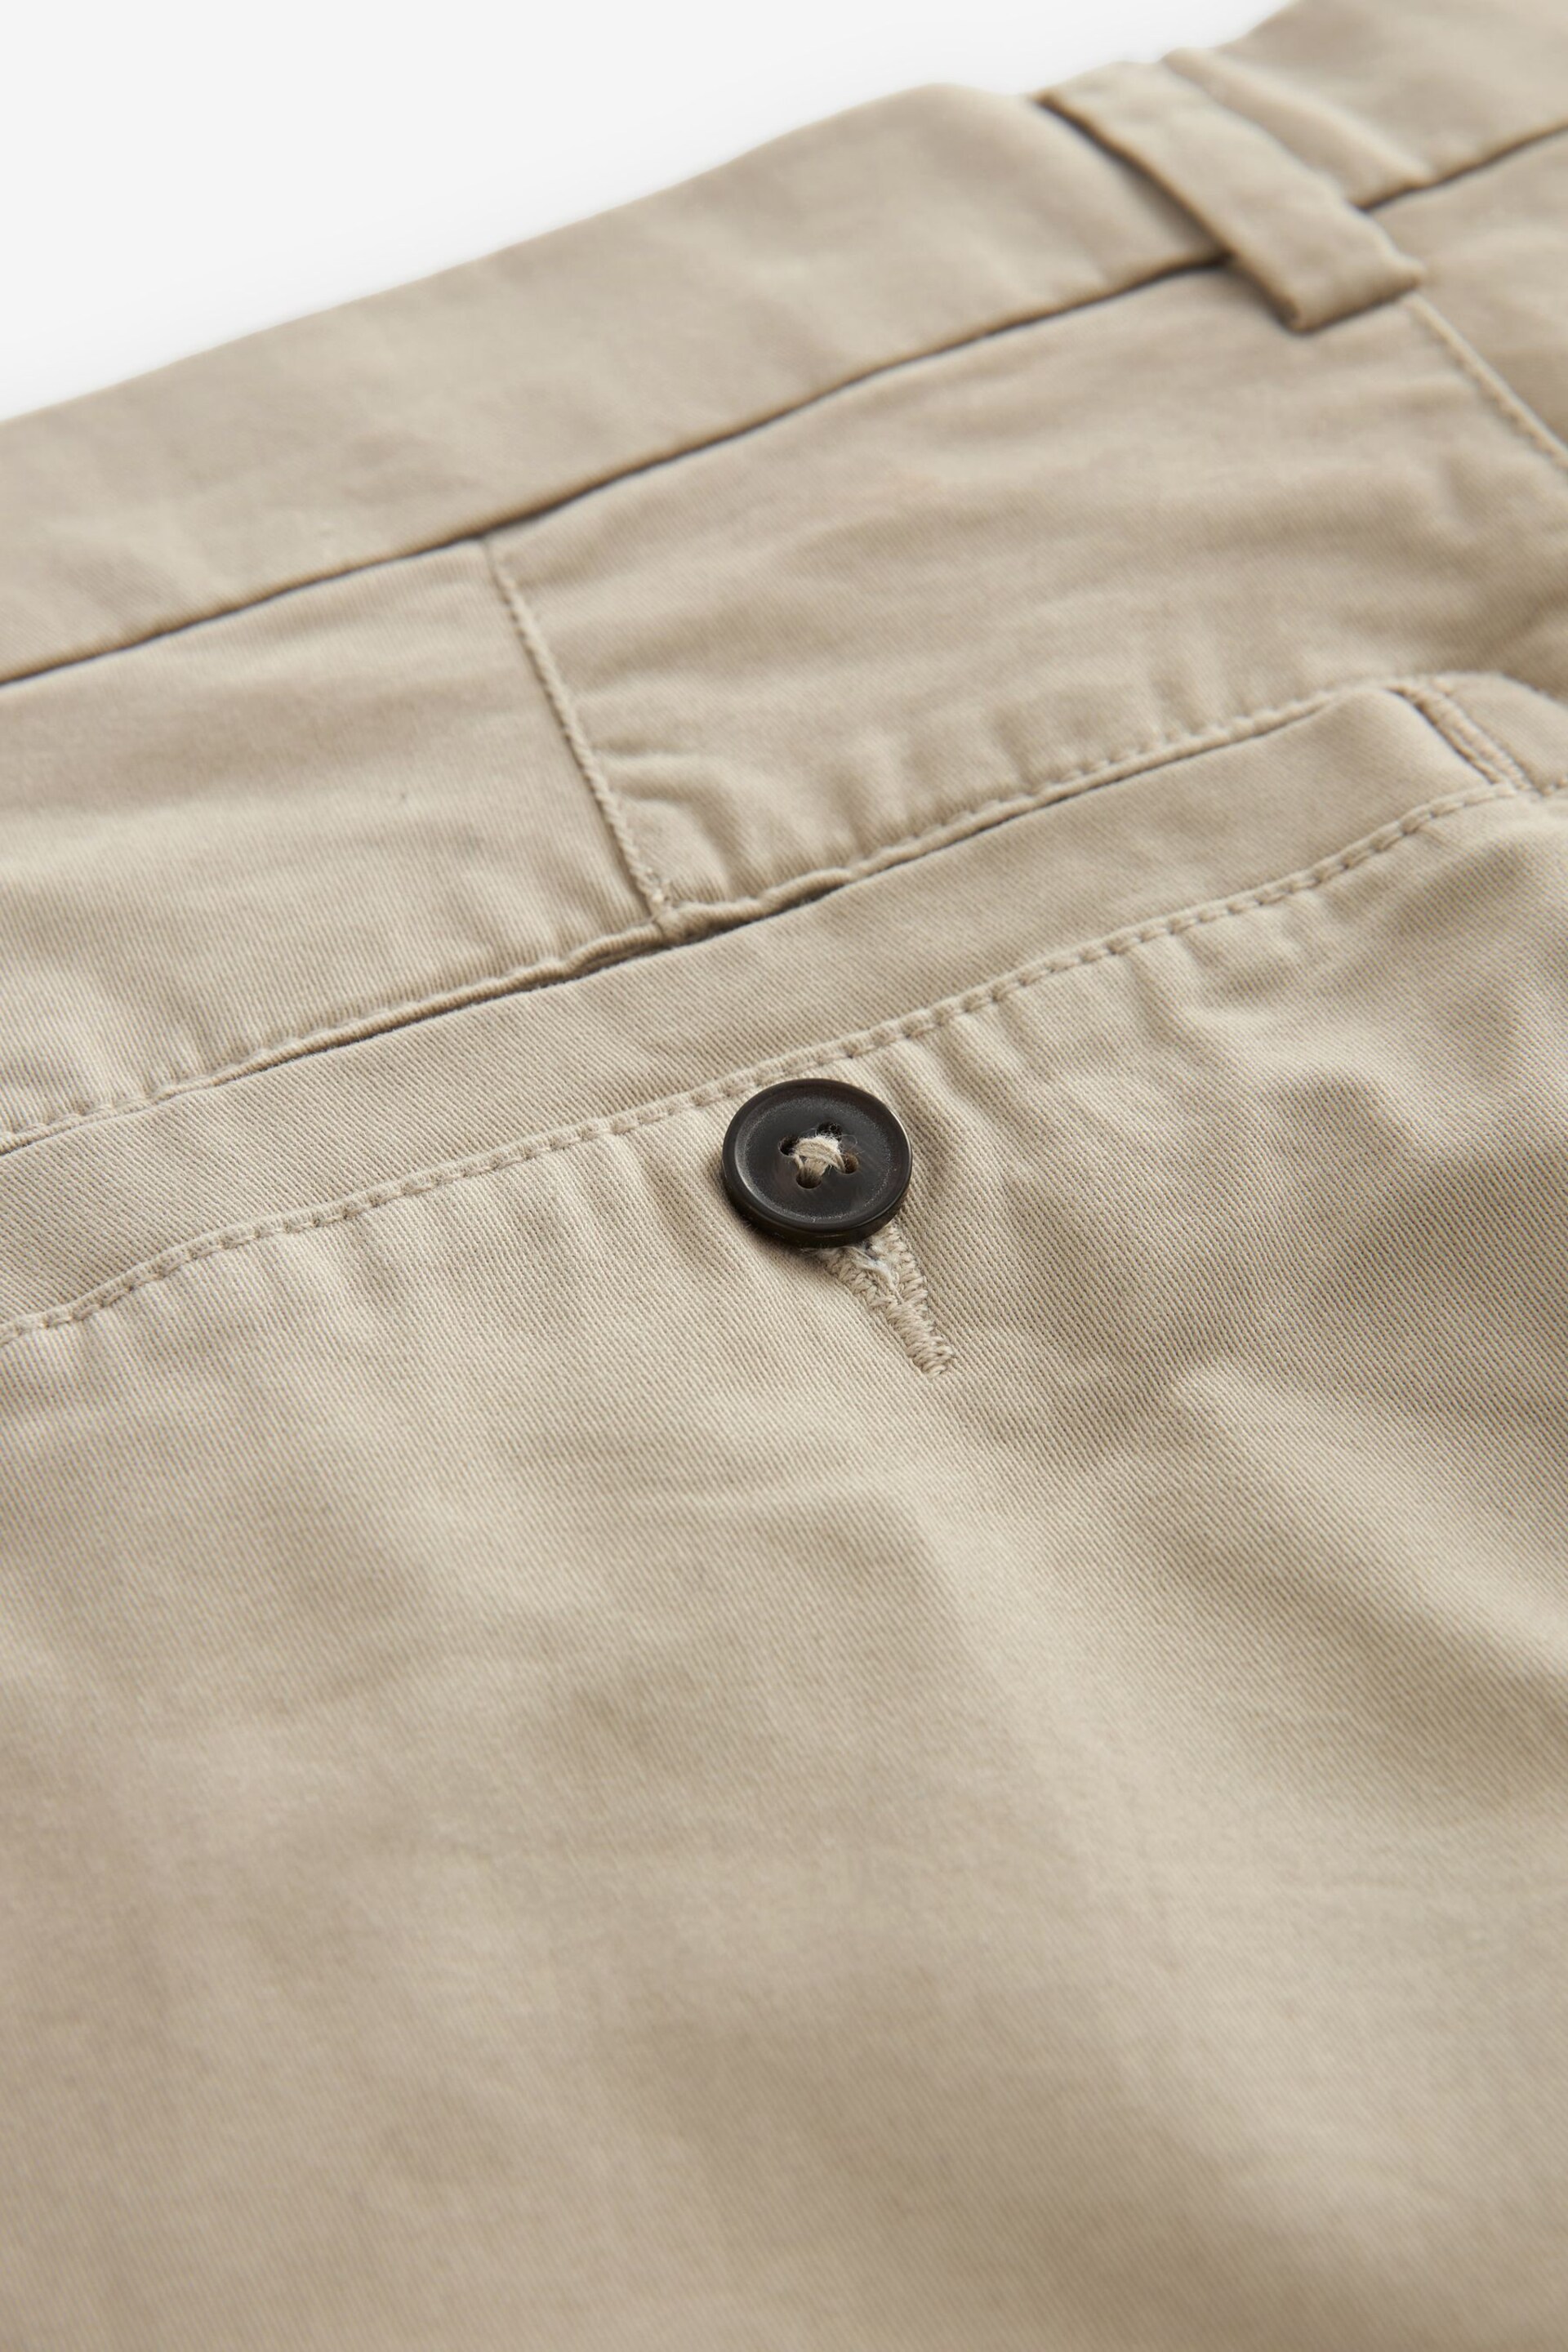 Stone Slim Fit Stretch Chinos Shorts - Image 7 of 9